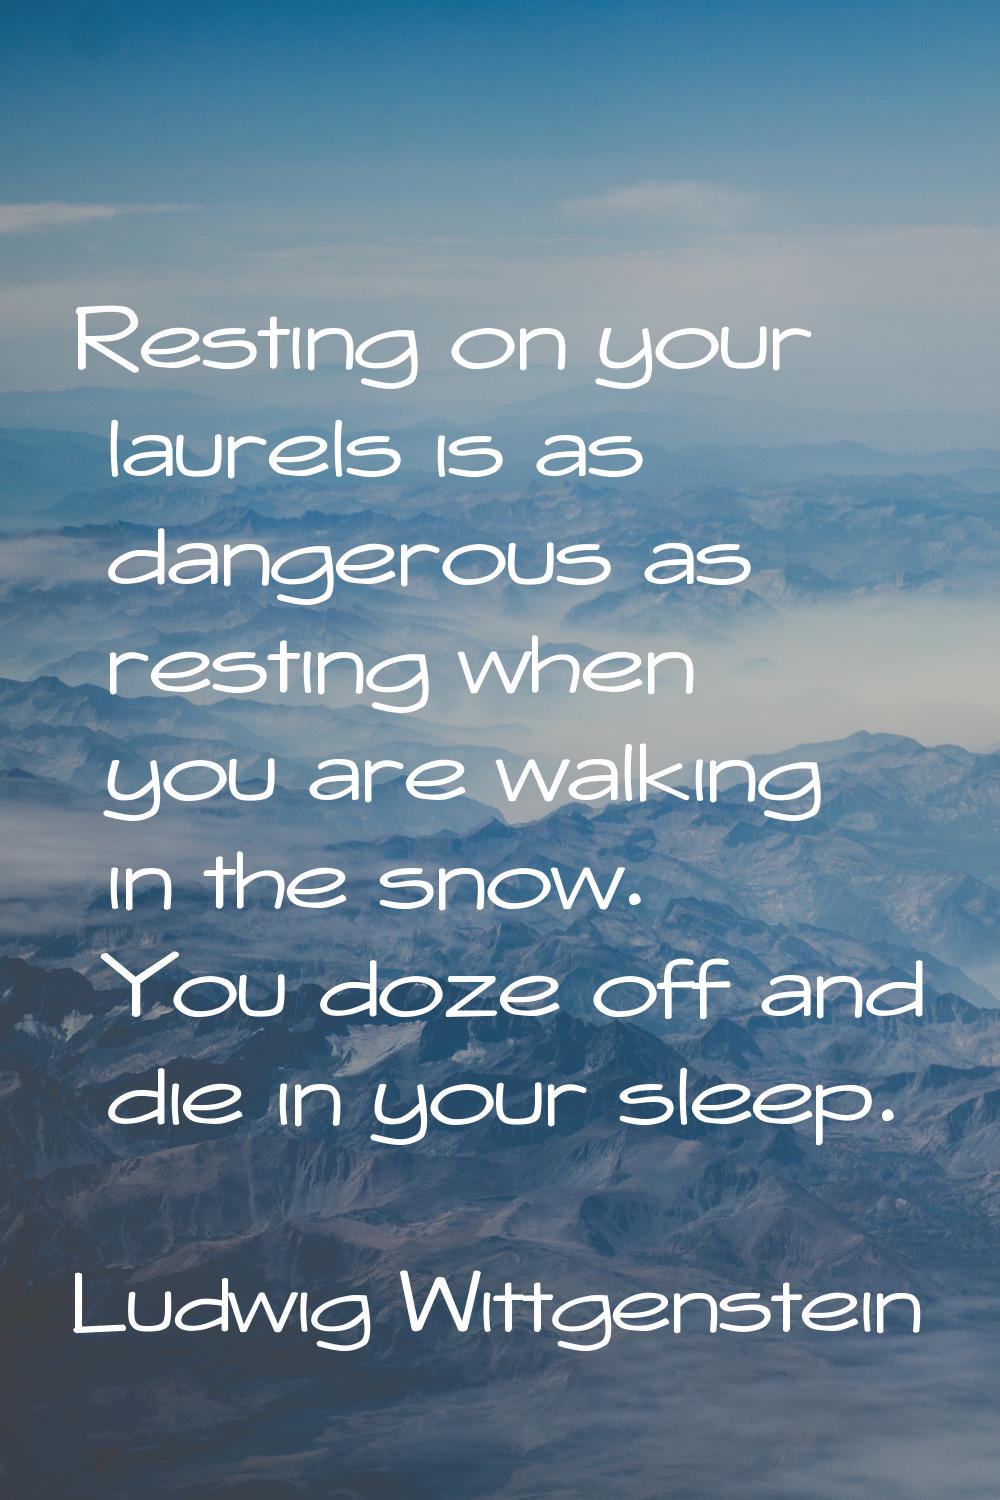 Resting on your laurels is as dangerous as resting when you are walking in the snow. You doze off a